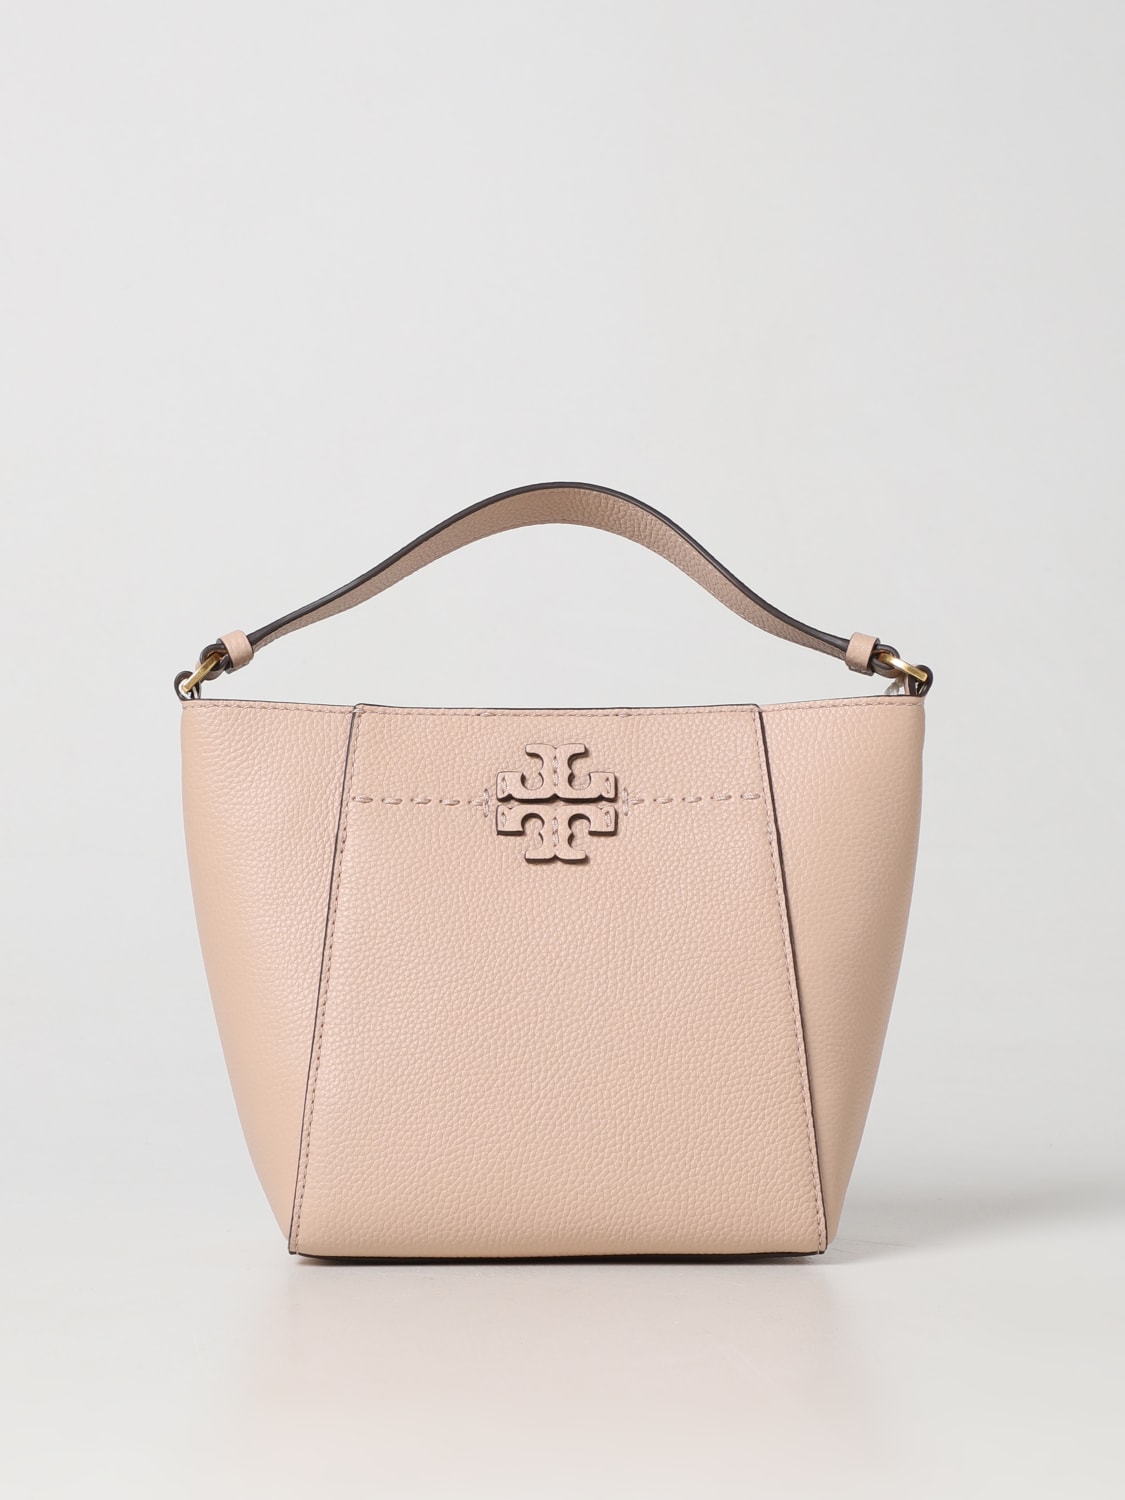 Tory Burch Bags.. In Pink